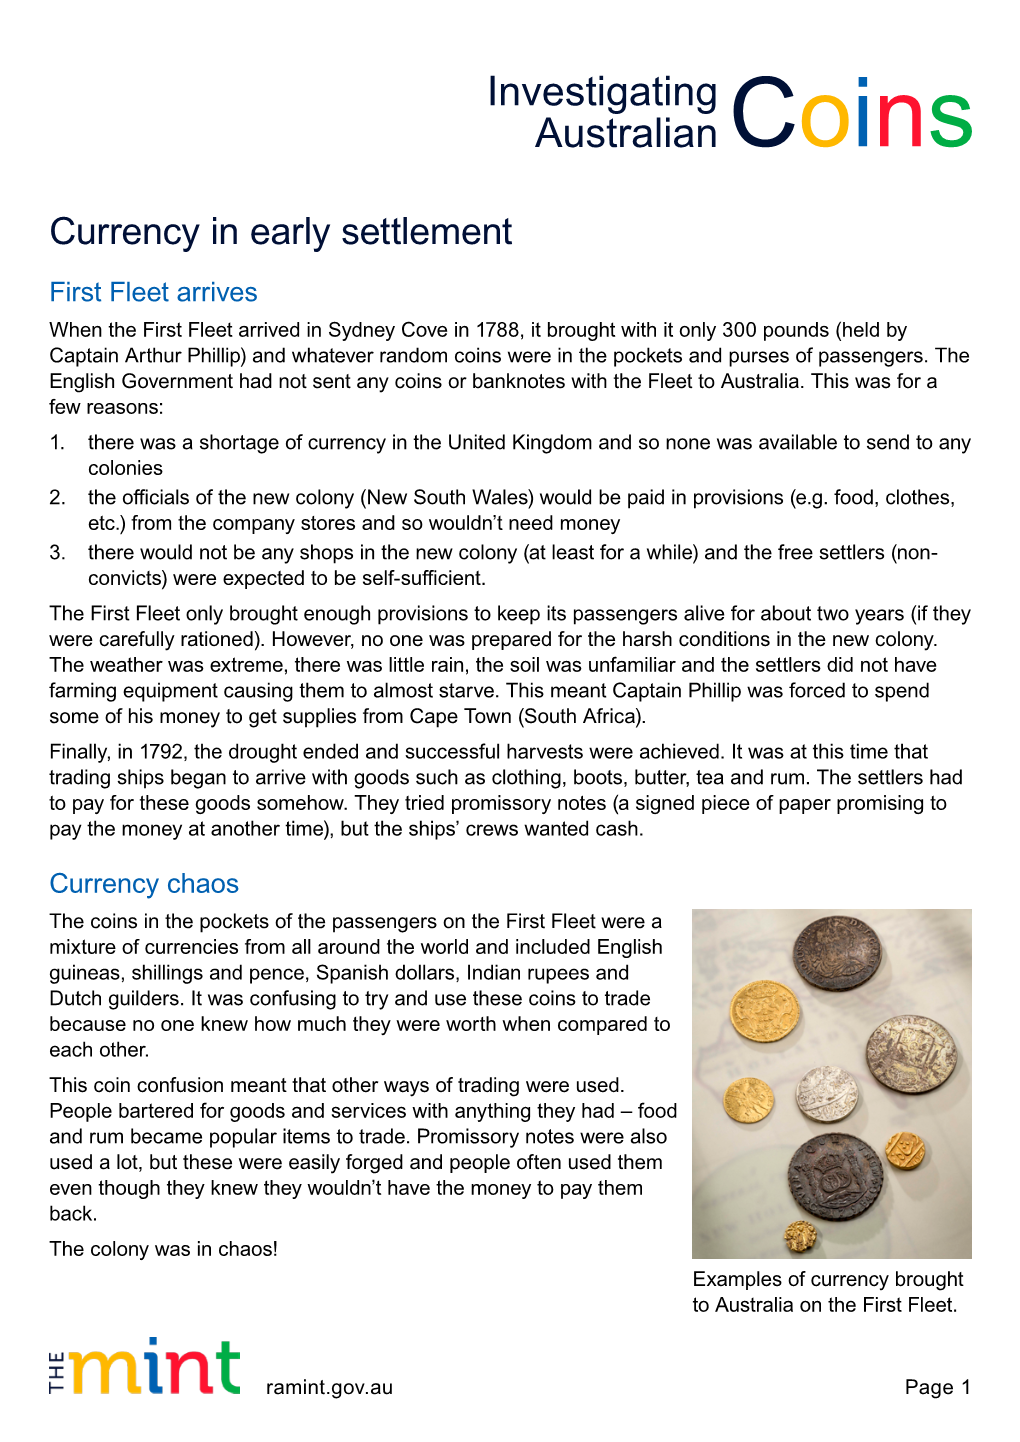 Currency in Early Settlement